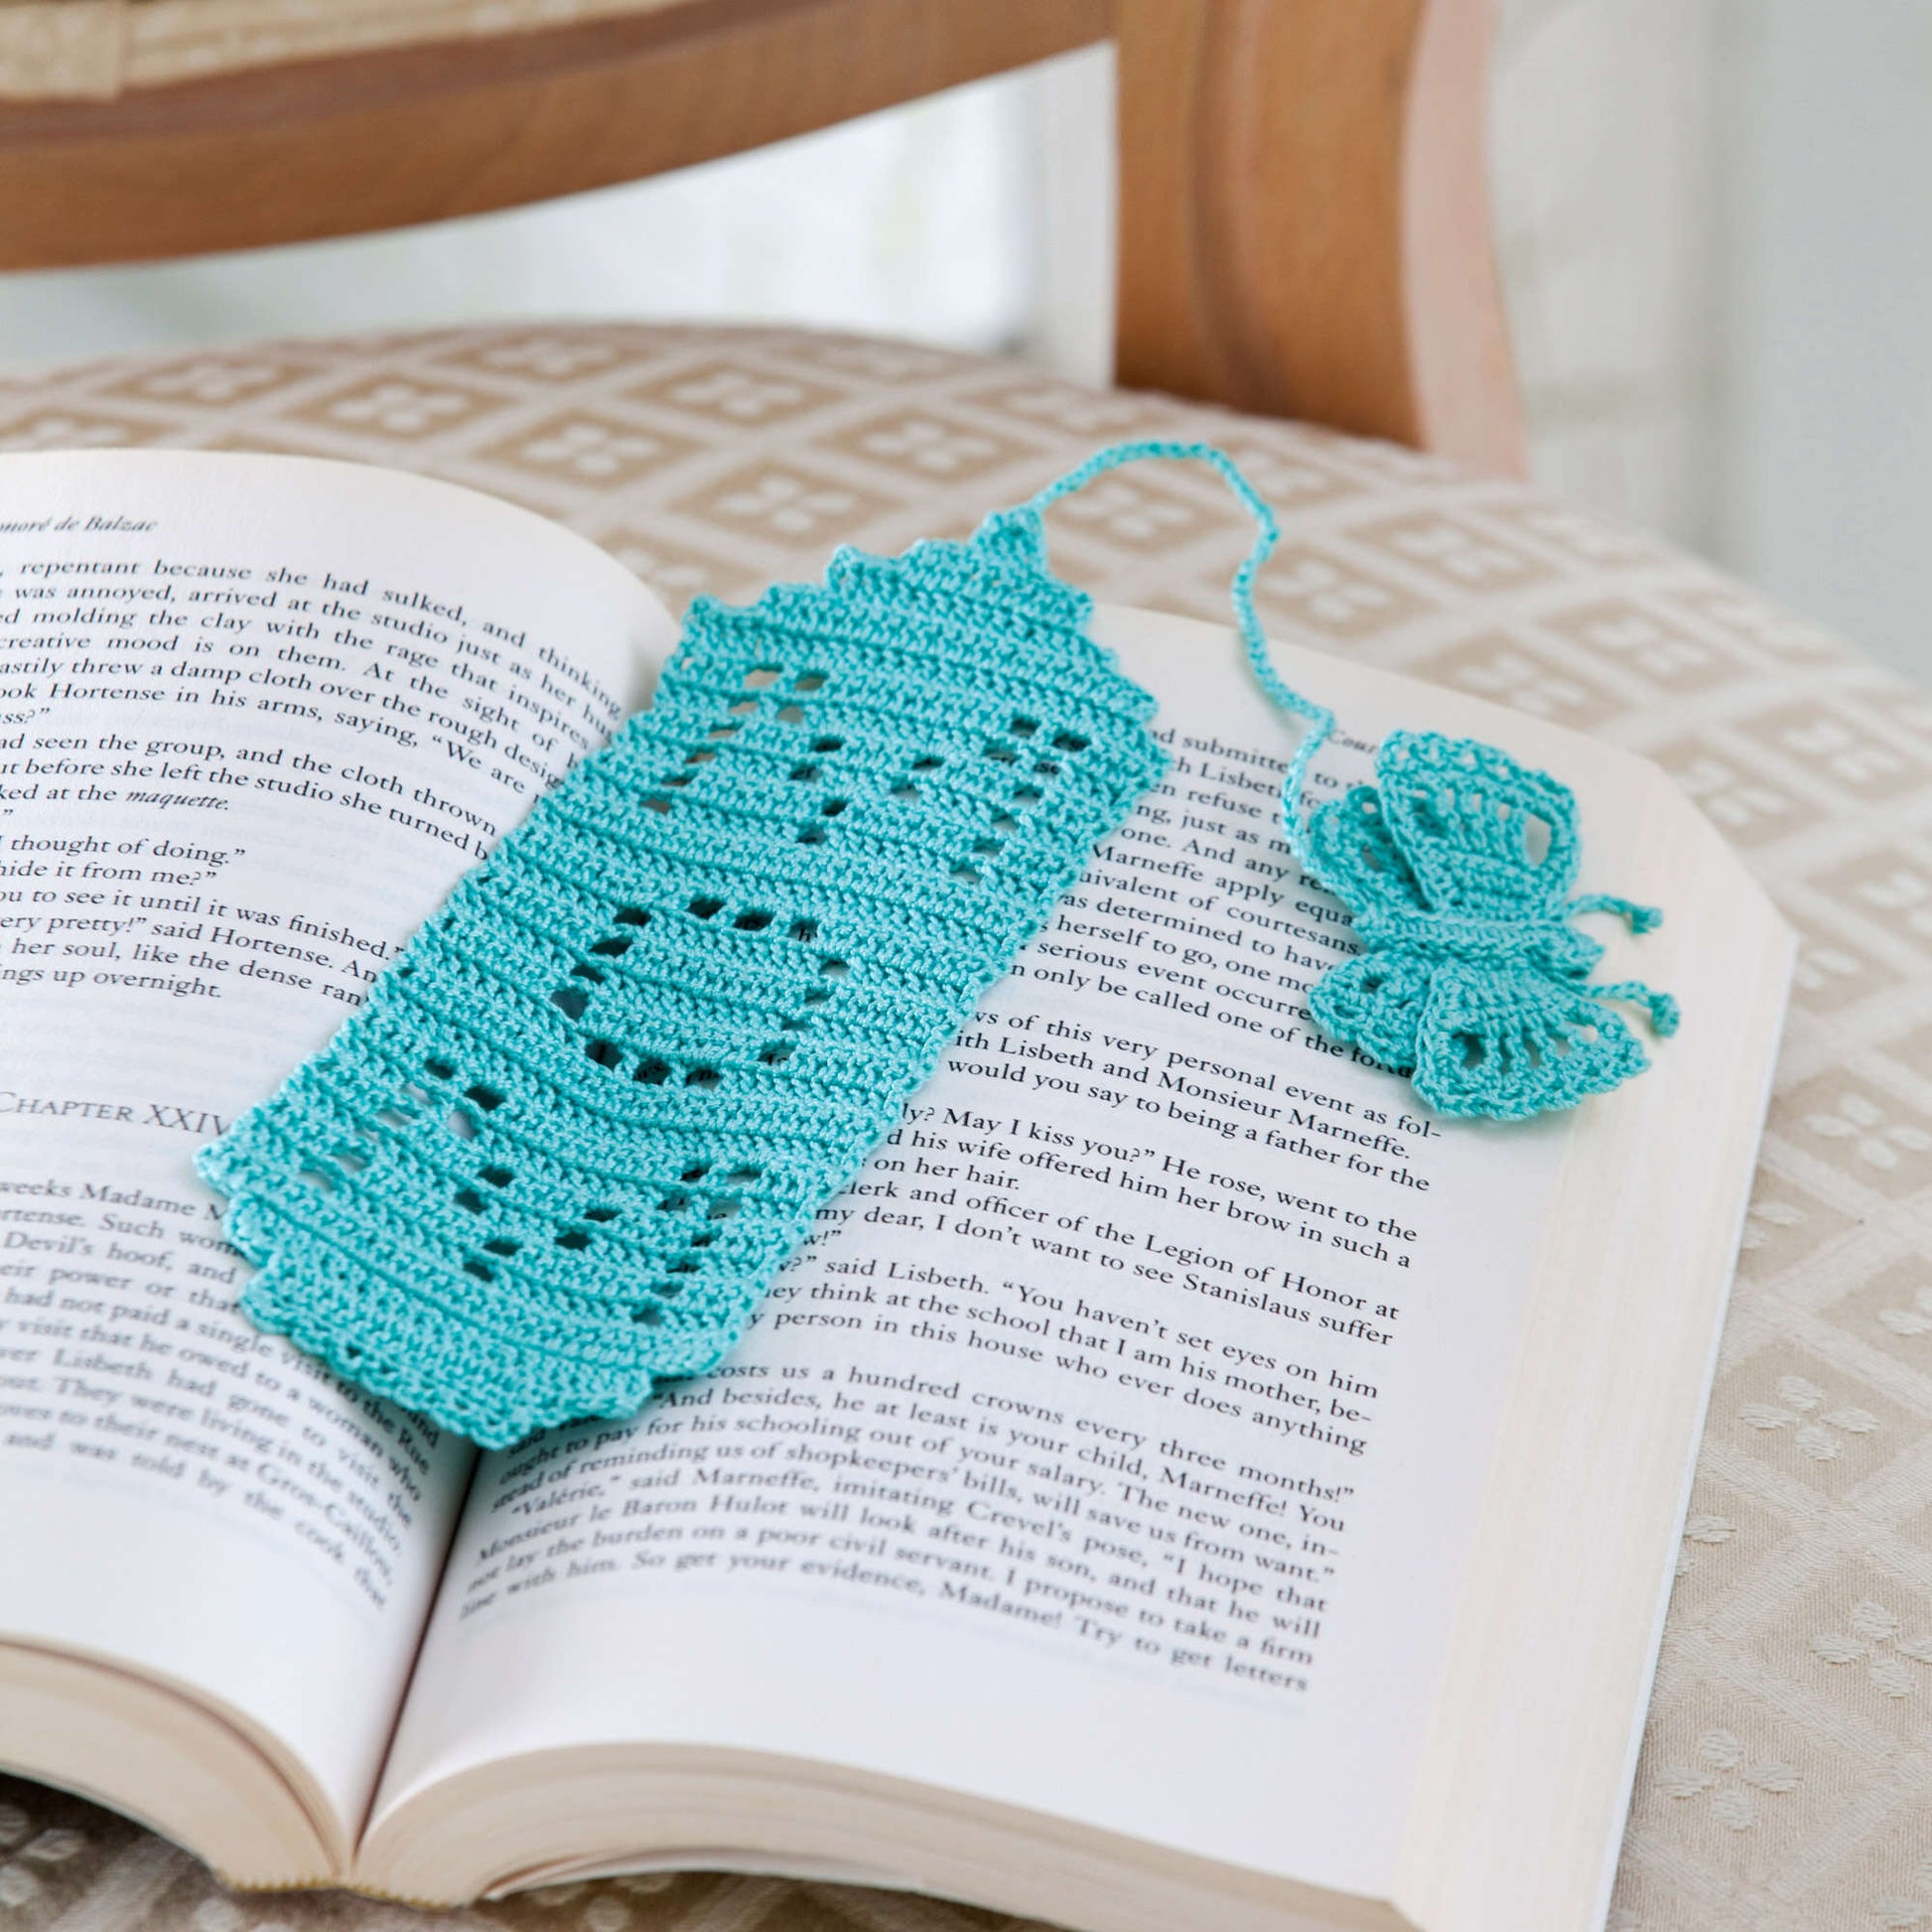 Aunt Lydia's Bookmark for Mom Crochet Accessory made in Aunt Lydia's Classic Crochet Thread yarn